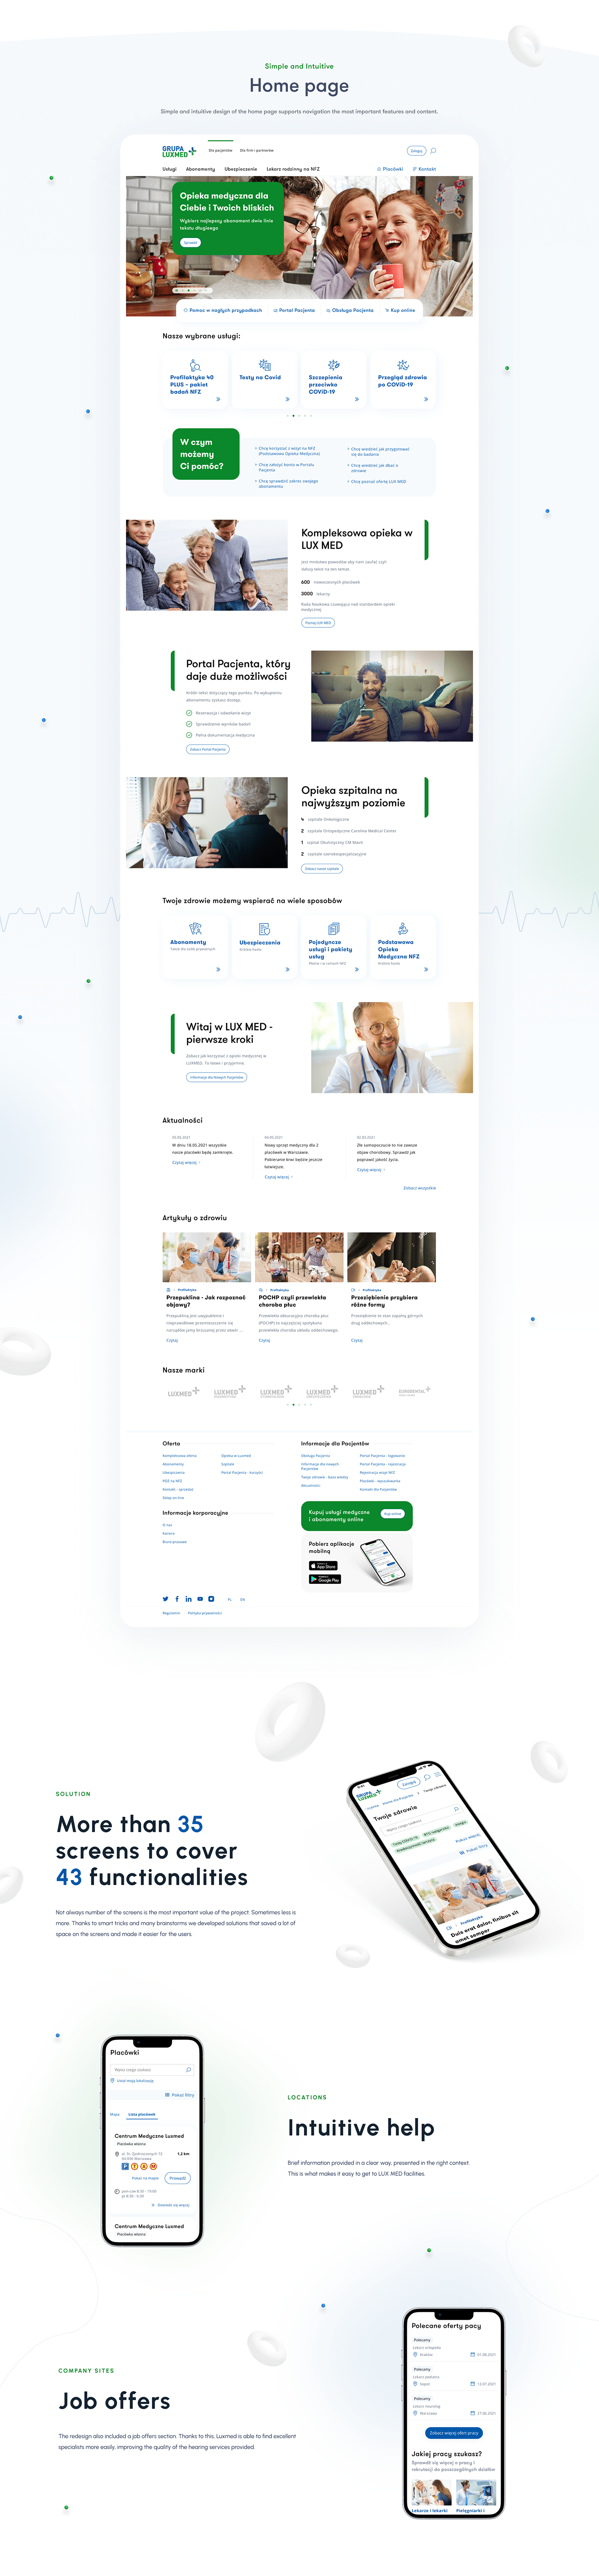 UI ux research healthcare Website user interface Experience UI/UX landing page UX design